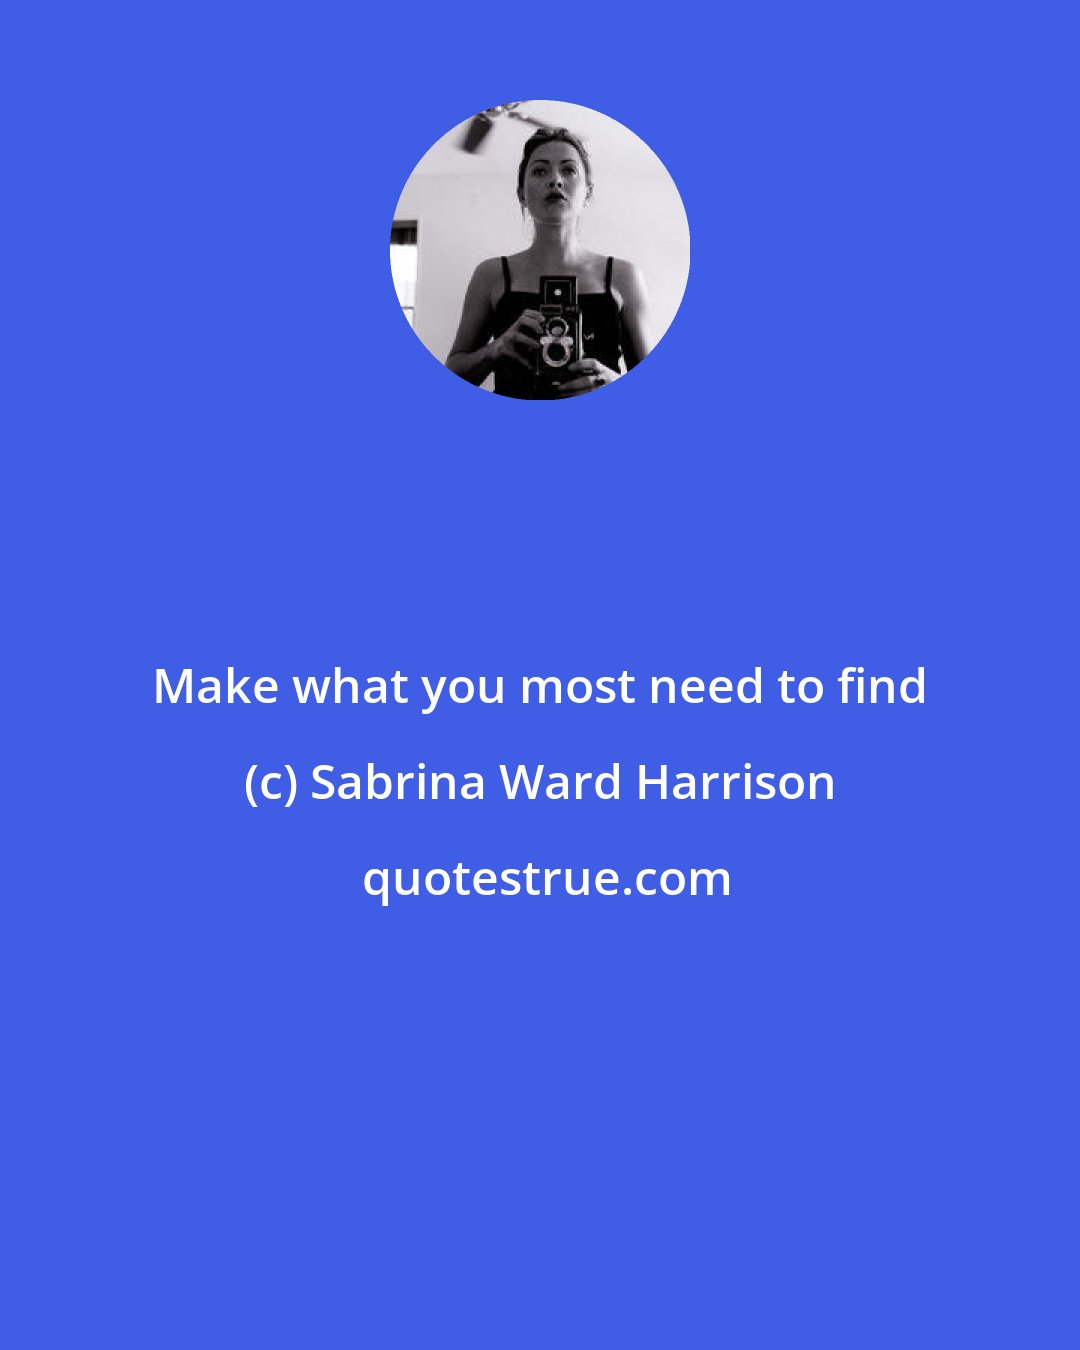 Sabrina Ward Harrison: Make what you most need to find